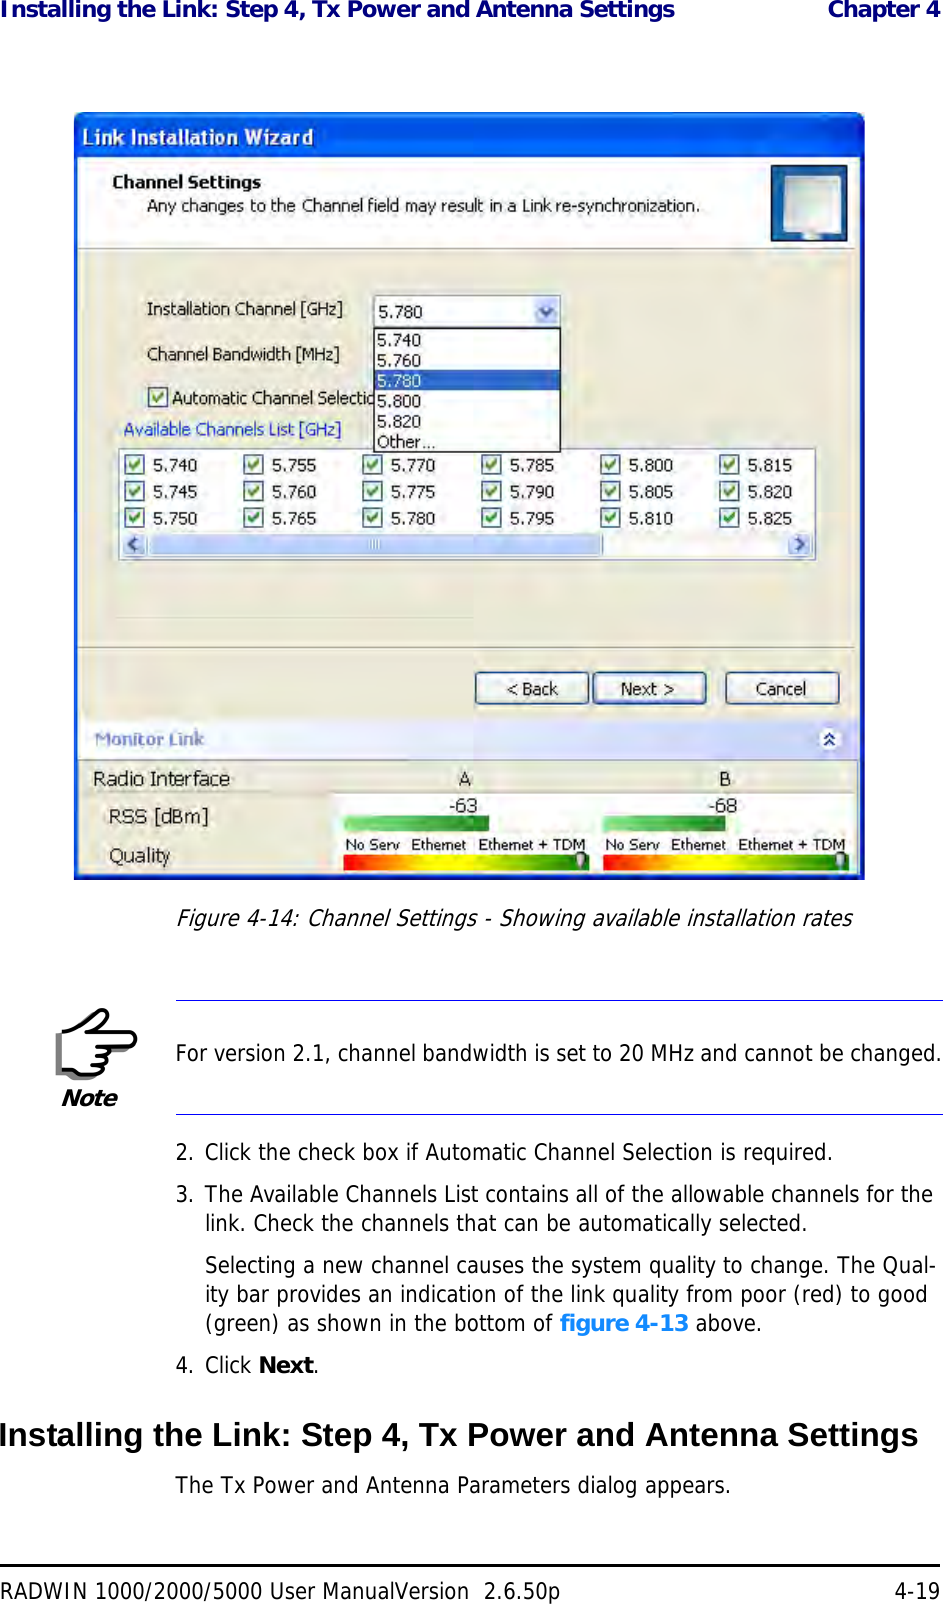 Installing the Link: Step 4, Tx Power and Antenna Settings  Chapter 4RADWIN 1000/2000/5000 User ManualVersion  2.6.50p 4-19Figure 4-14: Channel Settings - Showing available installation rates2. Click the check box if Automatic Channel Selection is required.3. The Available Channels List contains all of the allowable channels for the link. Check the channels that can be automatically selected.Selecting a new channel causes the system quality to change. The Qual-ity bar provides an indication of the link quality from poor (red) to good (green) as shown in the bottom of figure 4-13 above.4. Click Next.Installing the Link: Step 4, Tx Power and Antenna SettingsThe Tx Power and Antenna Parameters dialog appears.NoteFor version 2.1, channel bandwidth is set to 20 MHz and cannot be changed.